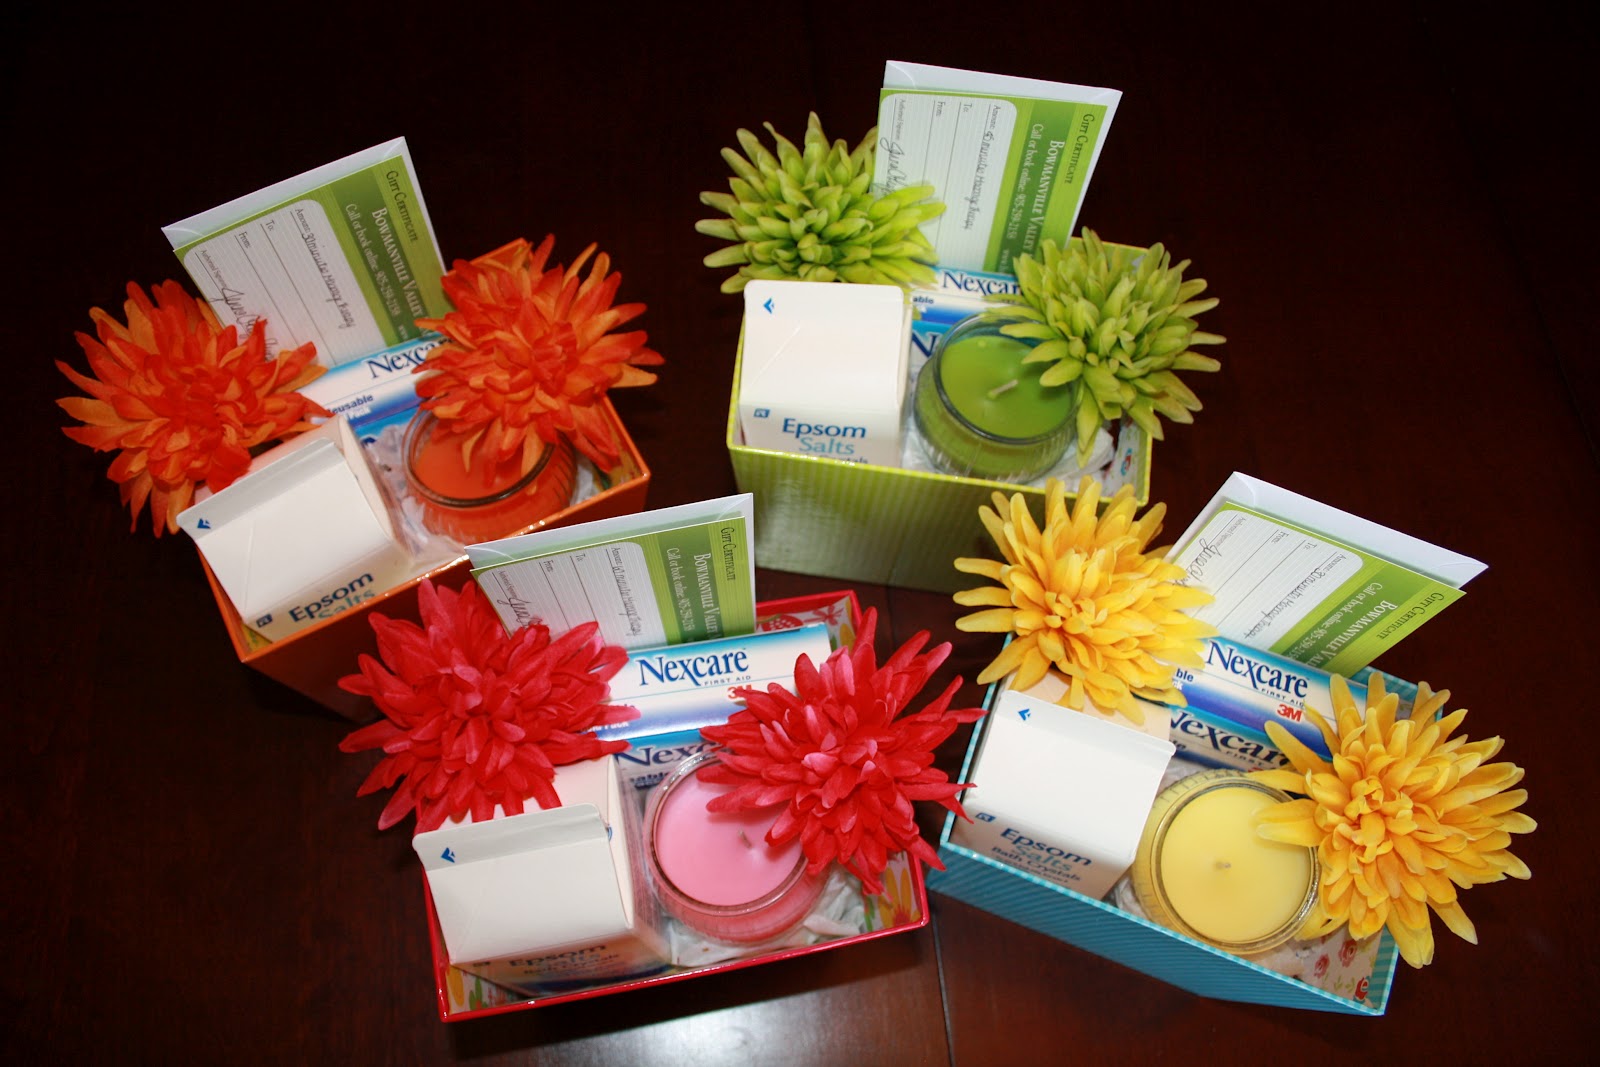 bowmanville-valley-massage-therapy-s-blog-massage-therapy-gift-baskets